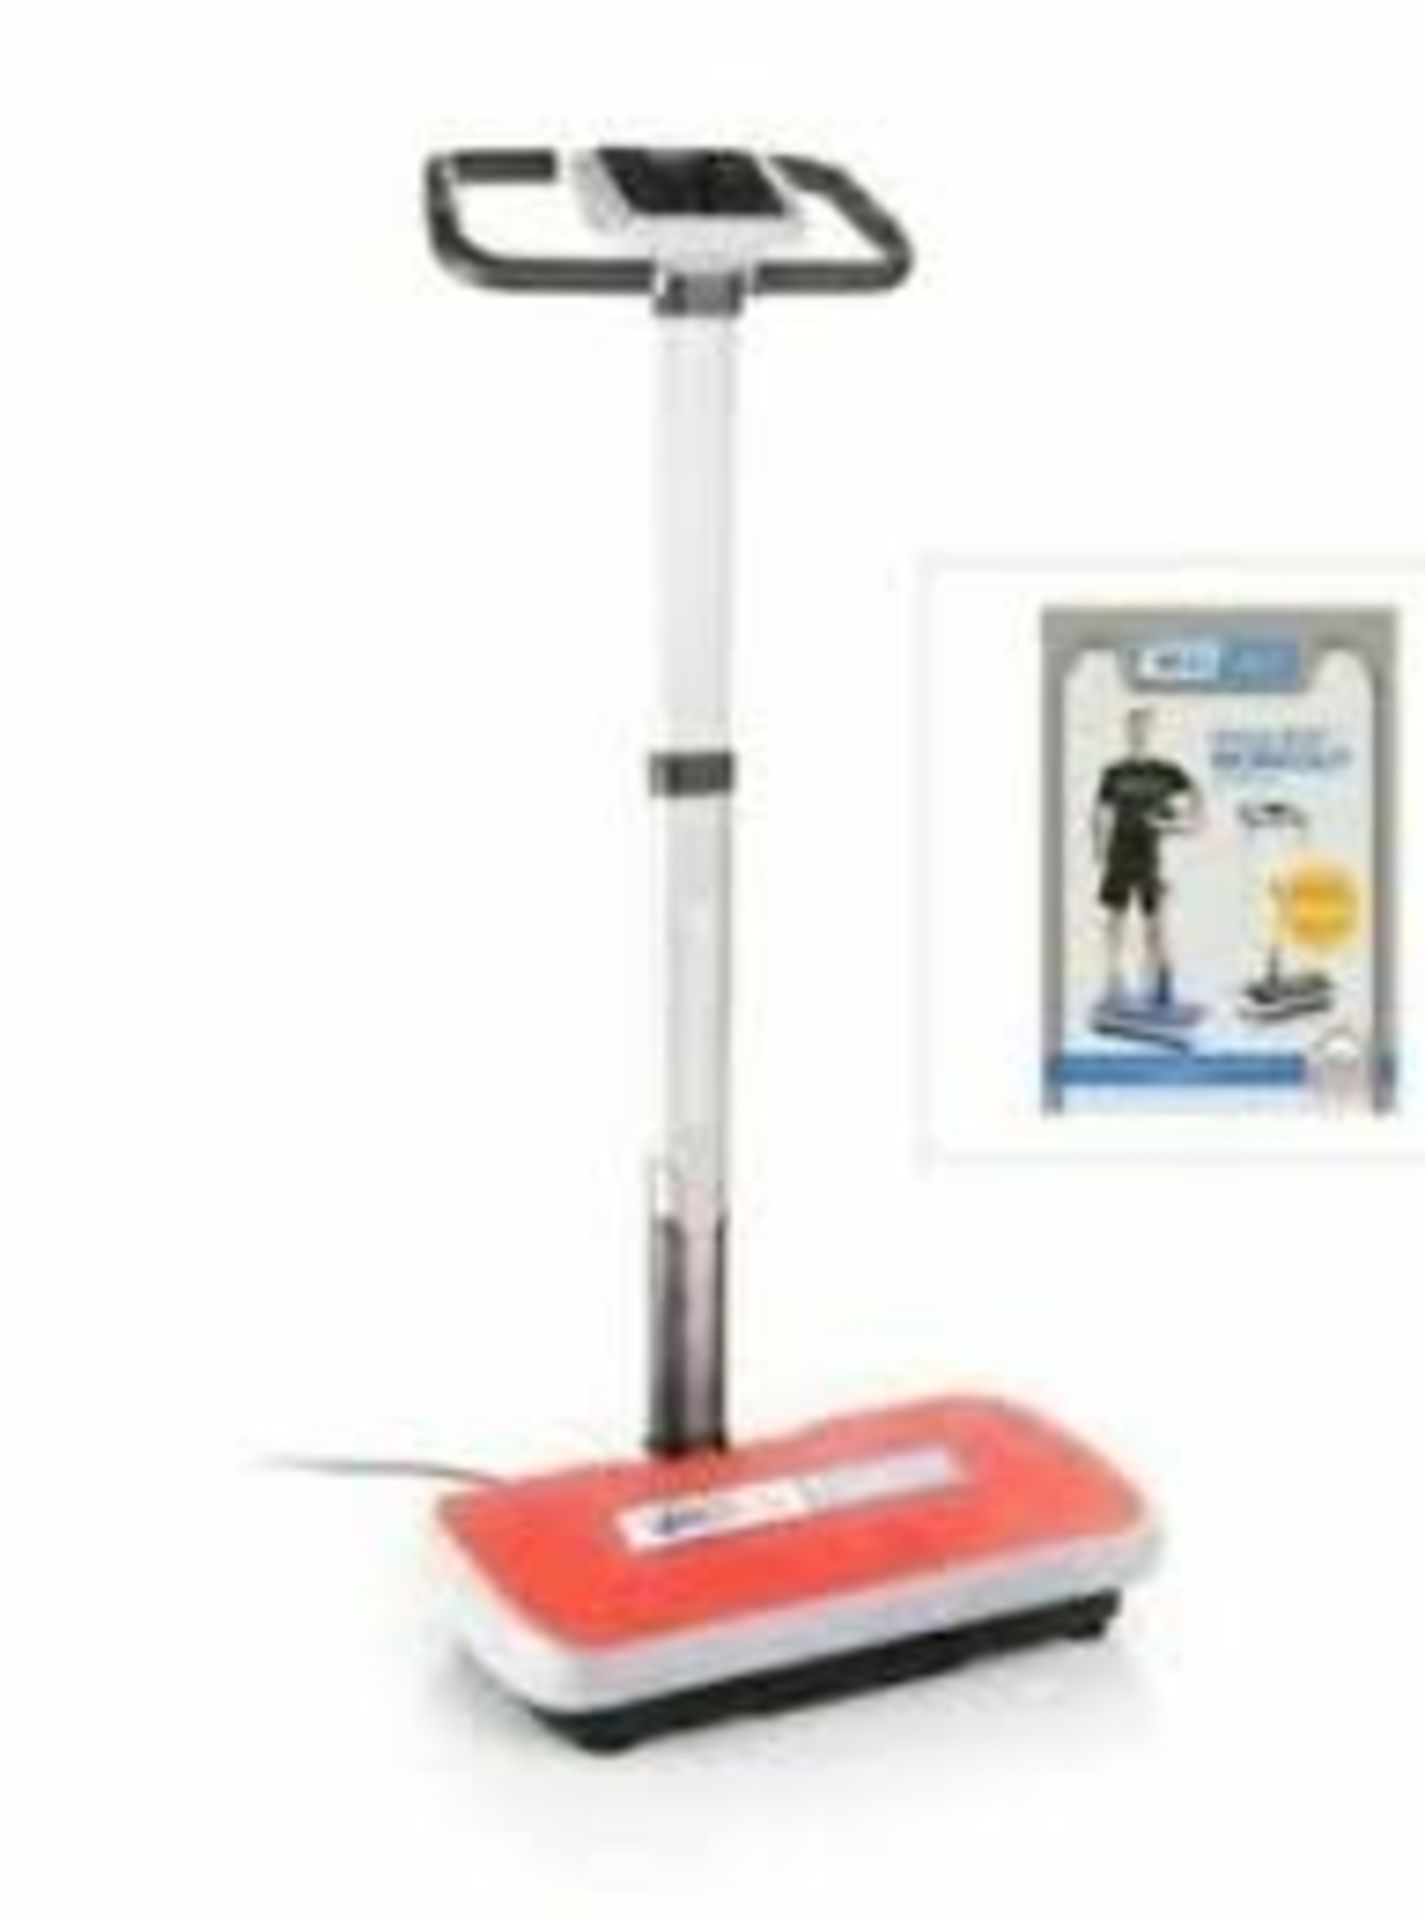 Boxed Vibrapower Coach, Vibration Power Plate, RRP£300.00 (Public Viewing and Appraisals Available)